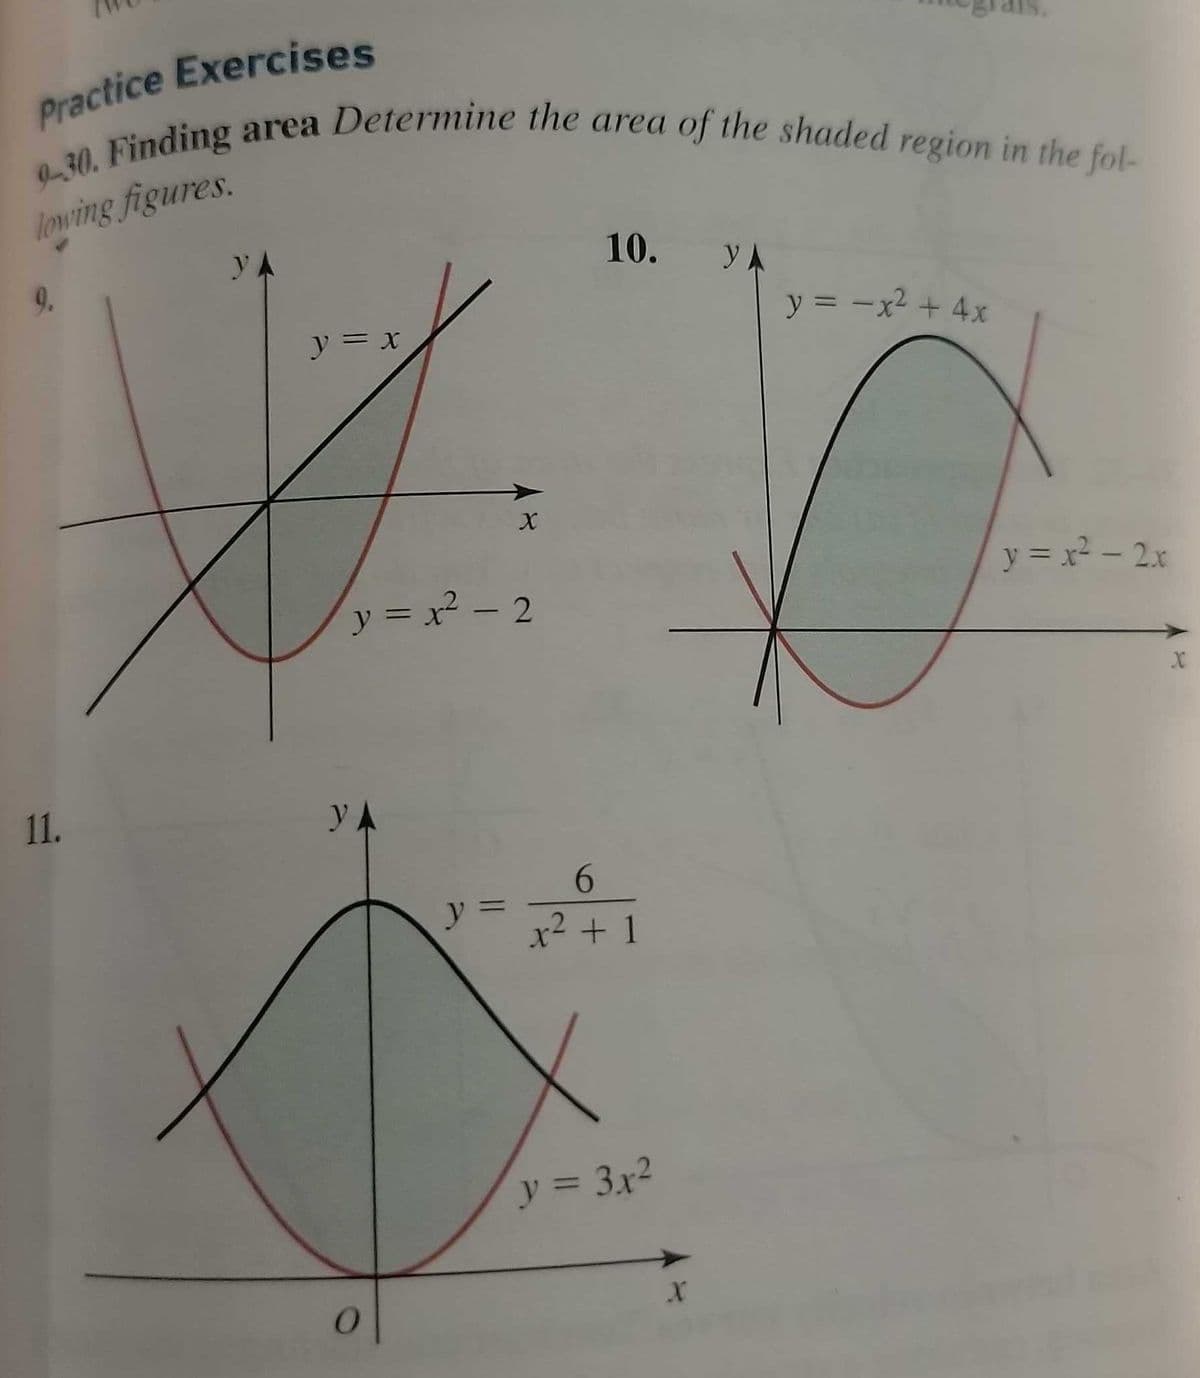 Practice Exercises
9-30. Finding area Determine the area of the shaded region in the fol-
lowing figures.
y
y = x
V
11.
y = x² - 2
УА
X
0
10. YA
6
y = x² + 1
y = 3x²
X
y = -x² + 4x
O
y = x² - 2x
X